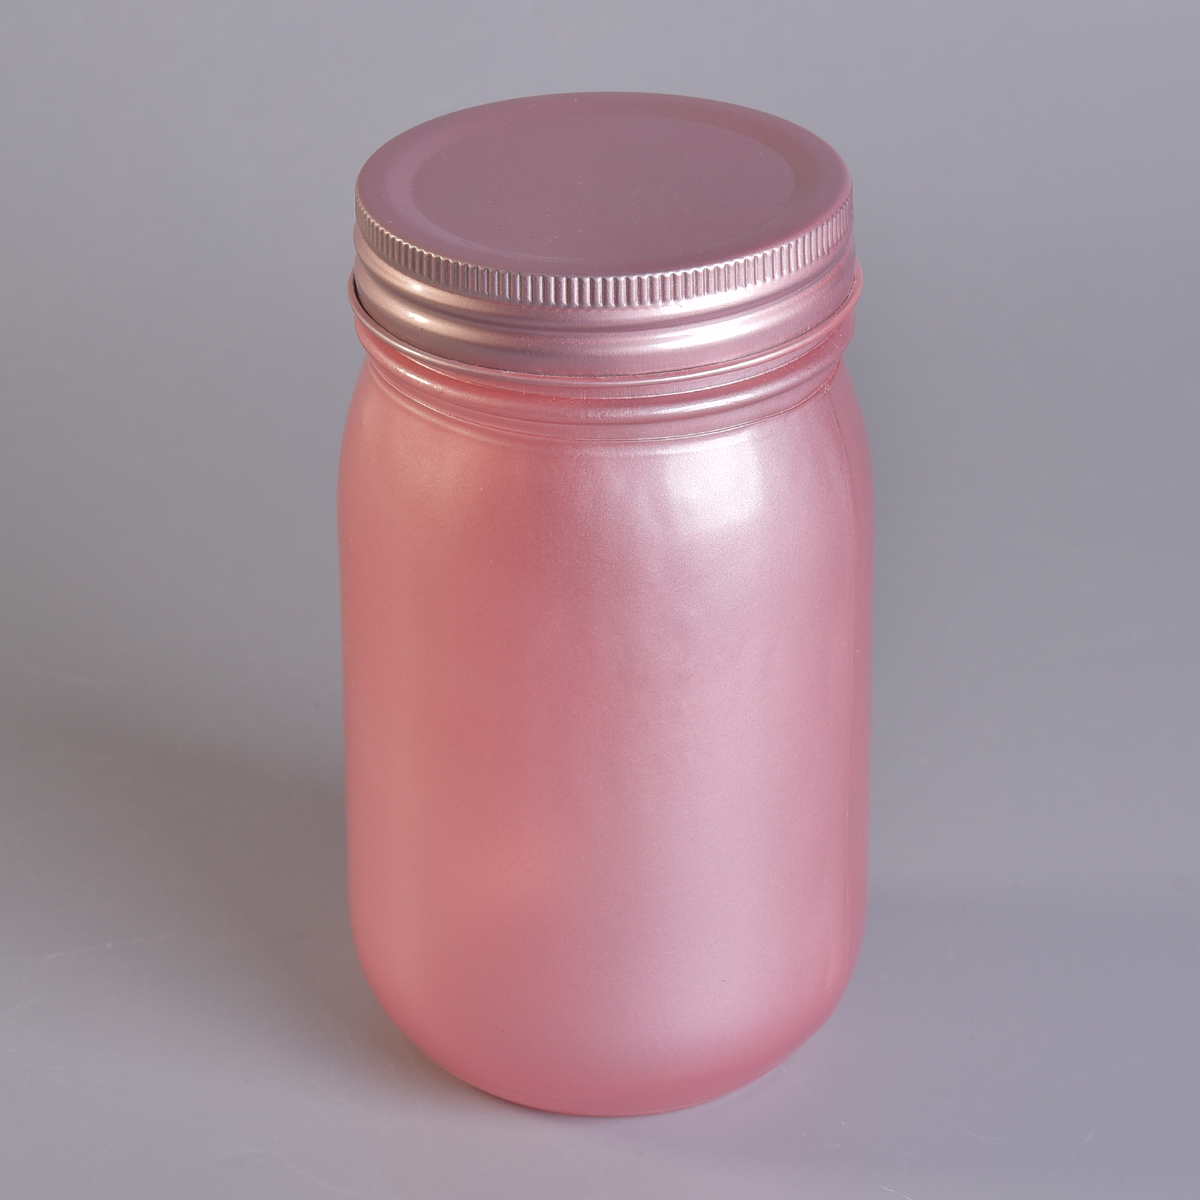 Low MOQ glass mason jar with lids for candle making